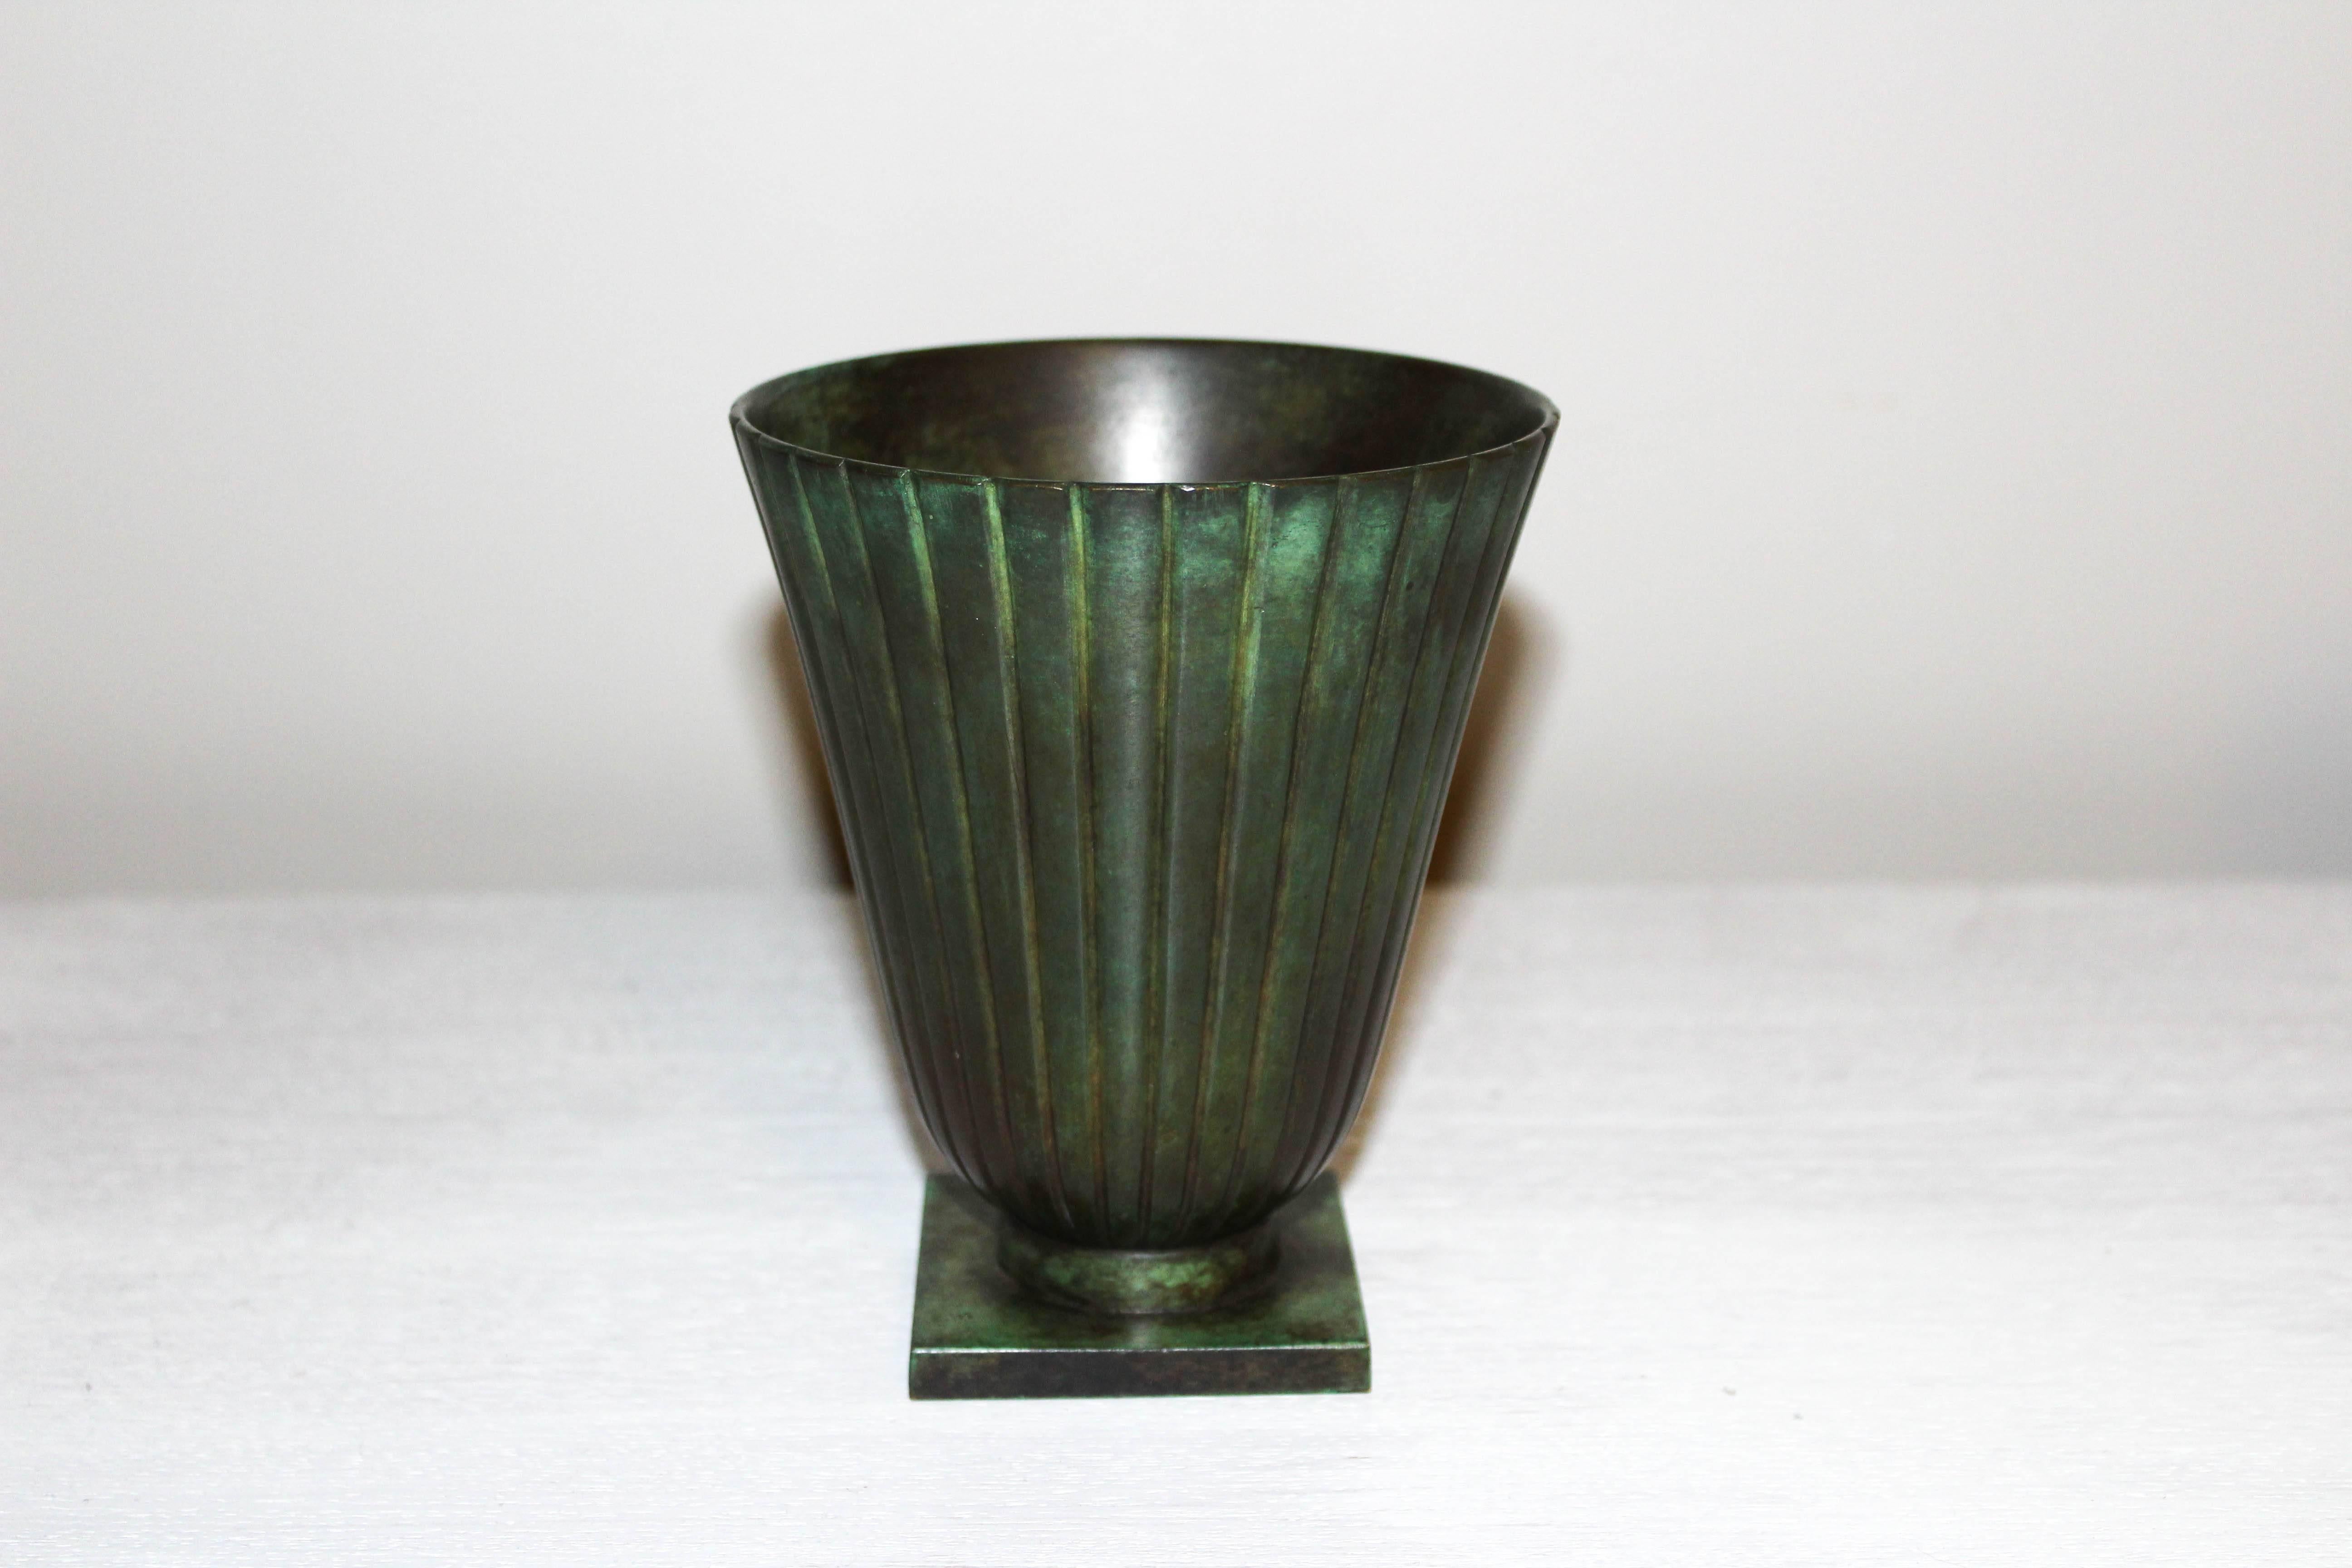 A very decorative bronze Art Deco vase by Swedish manufacturer GAB. The vase is in good vintage condition with patina.